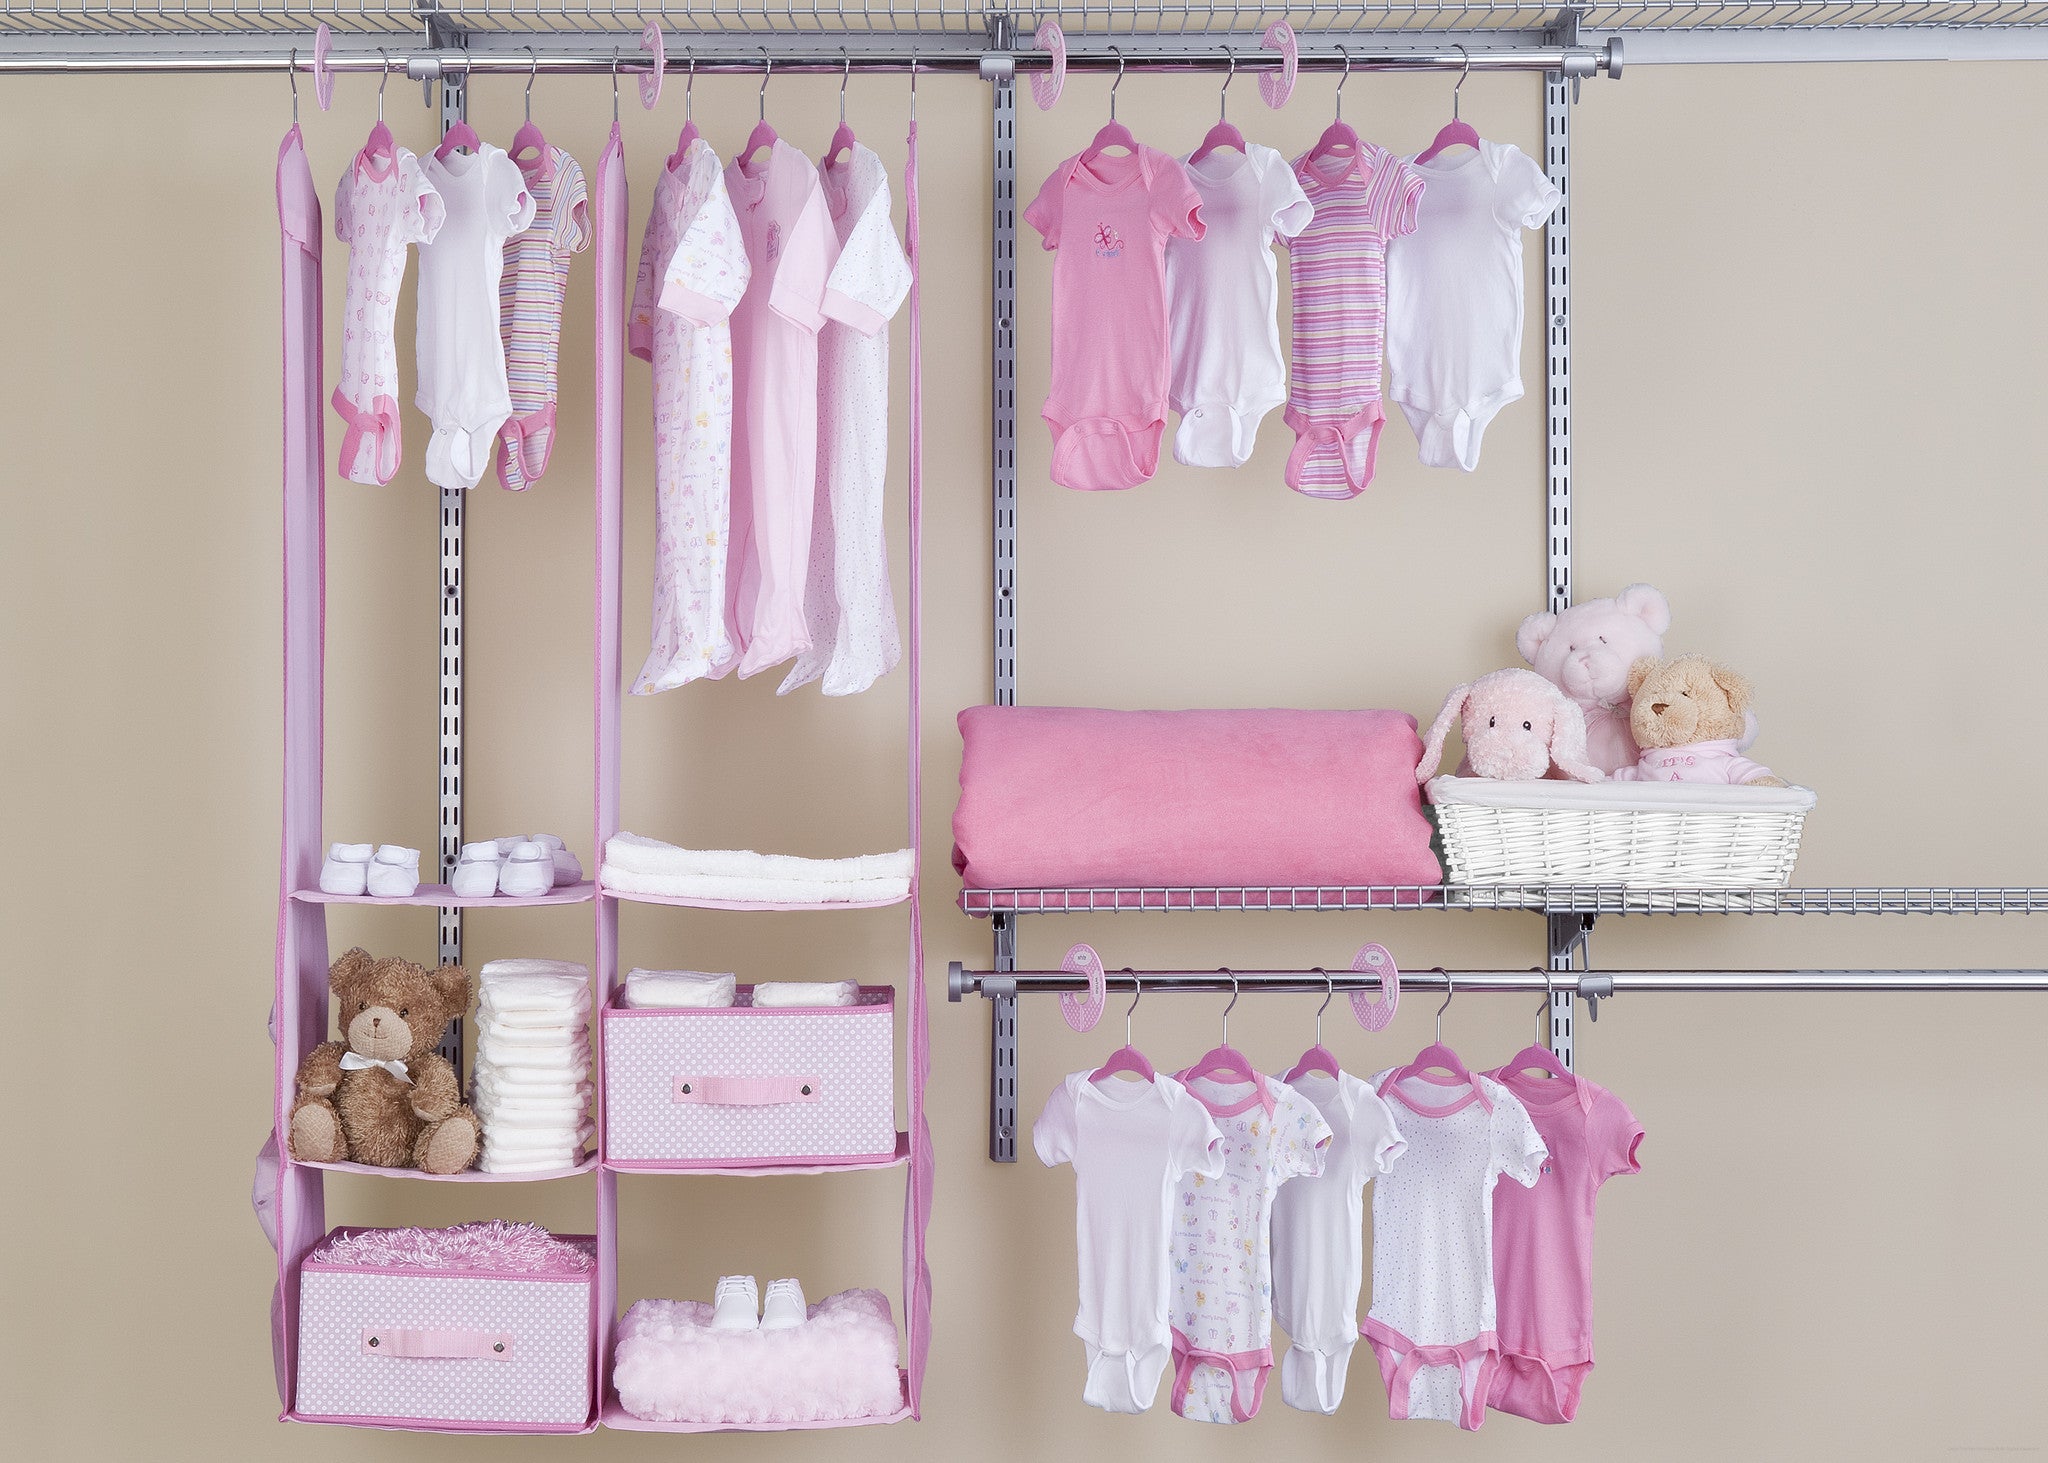 Female Pink Colorful Clothing Set of on the Racks and Shelves in